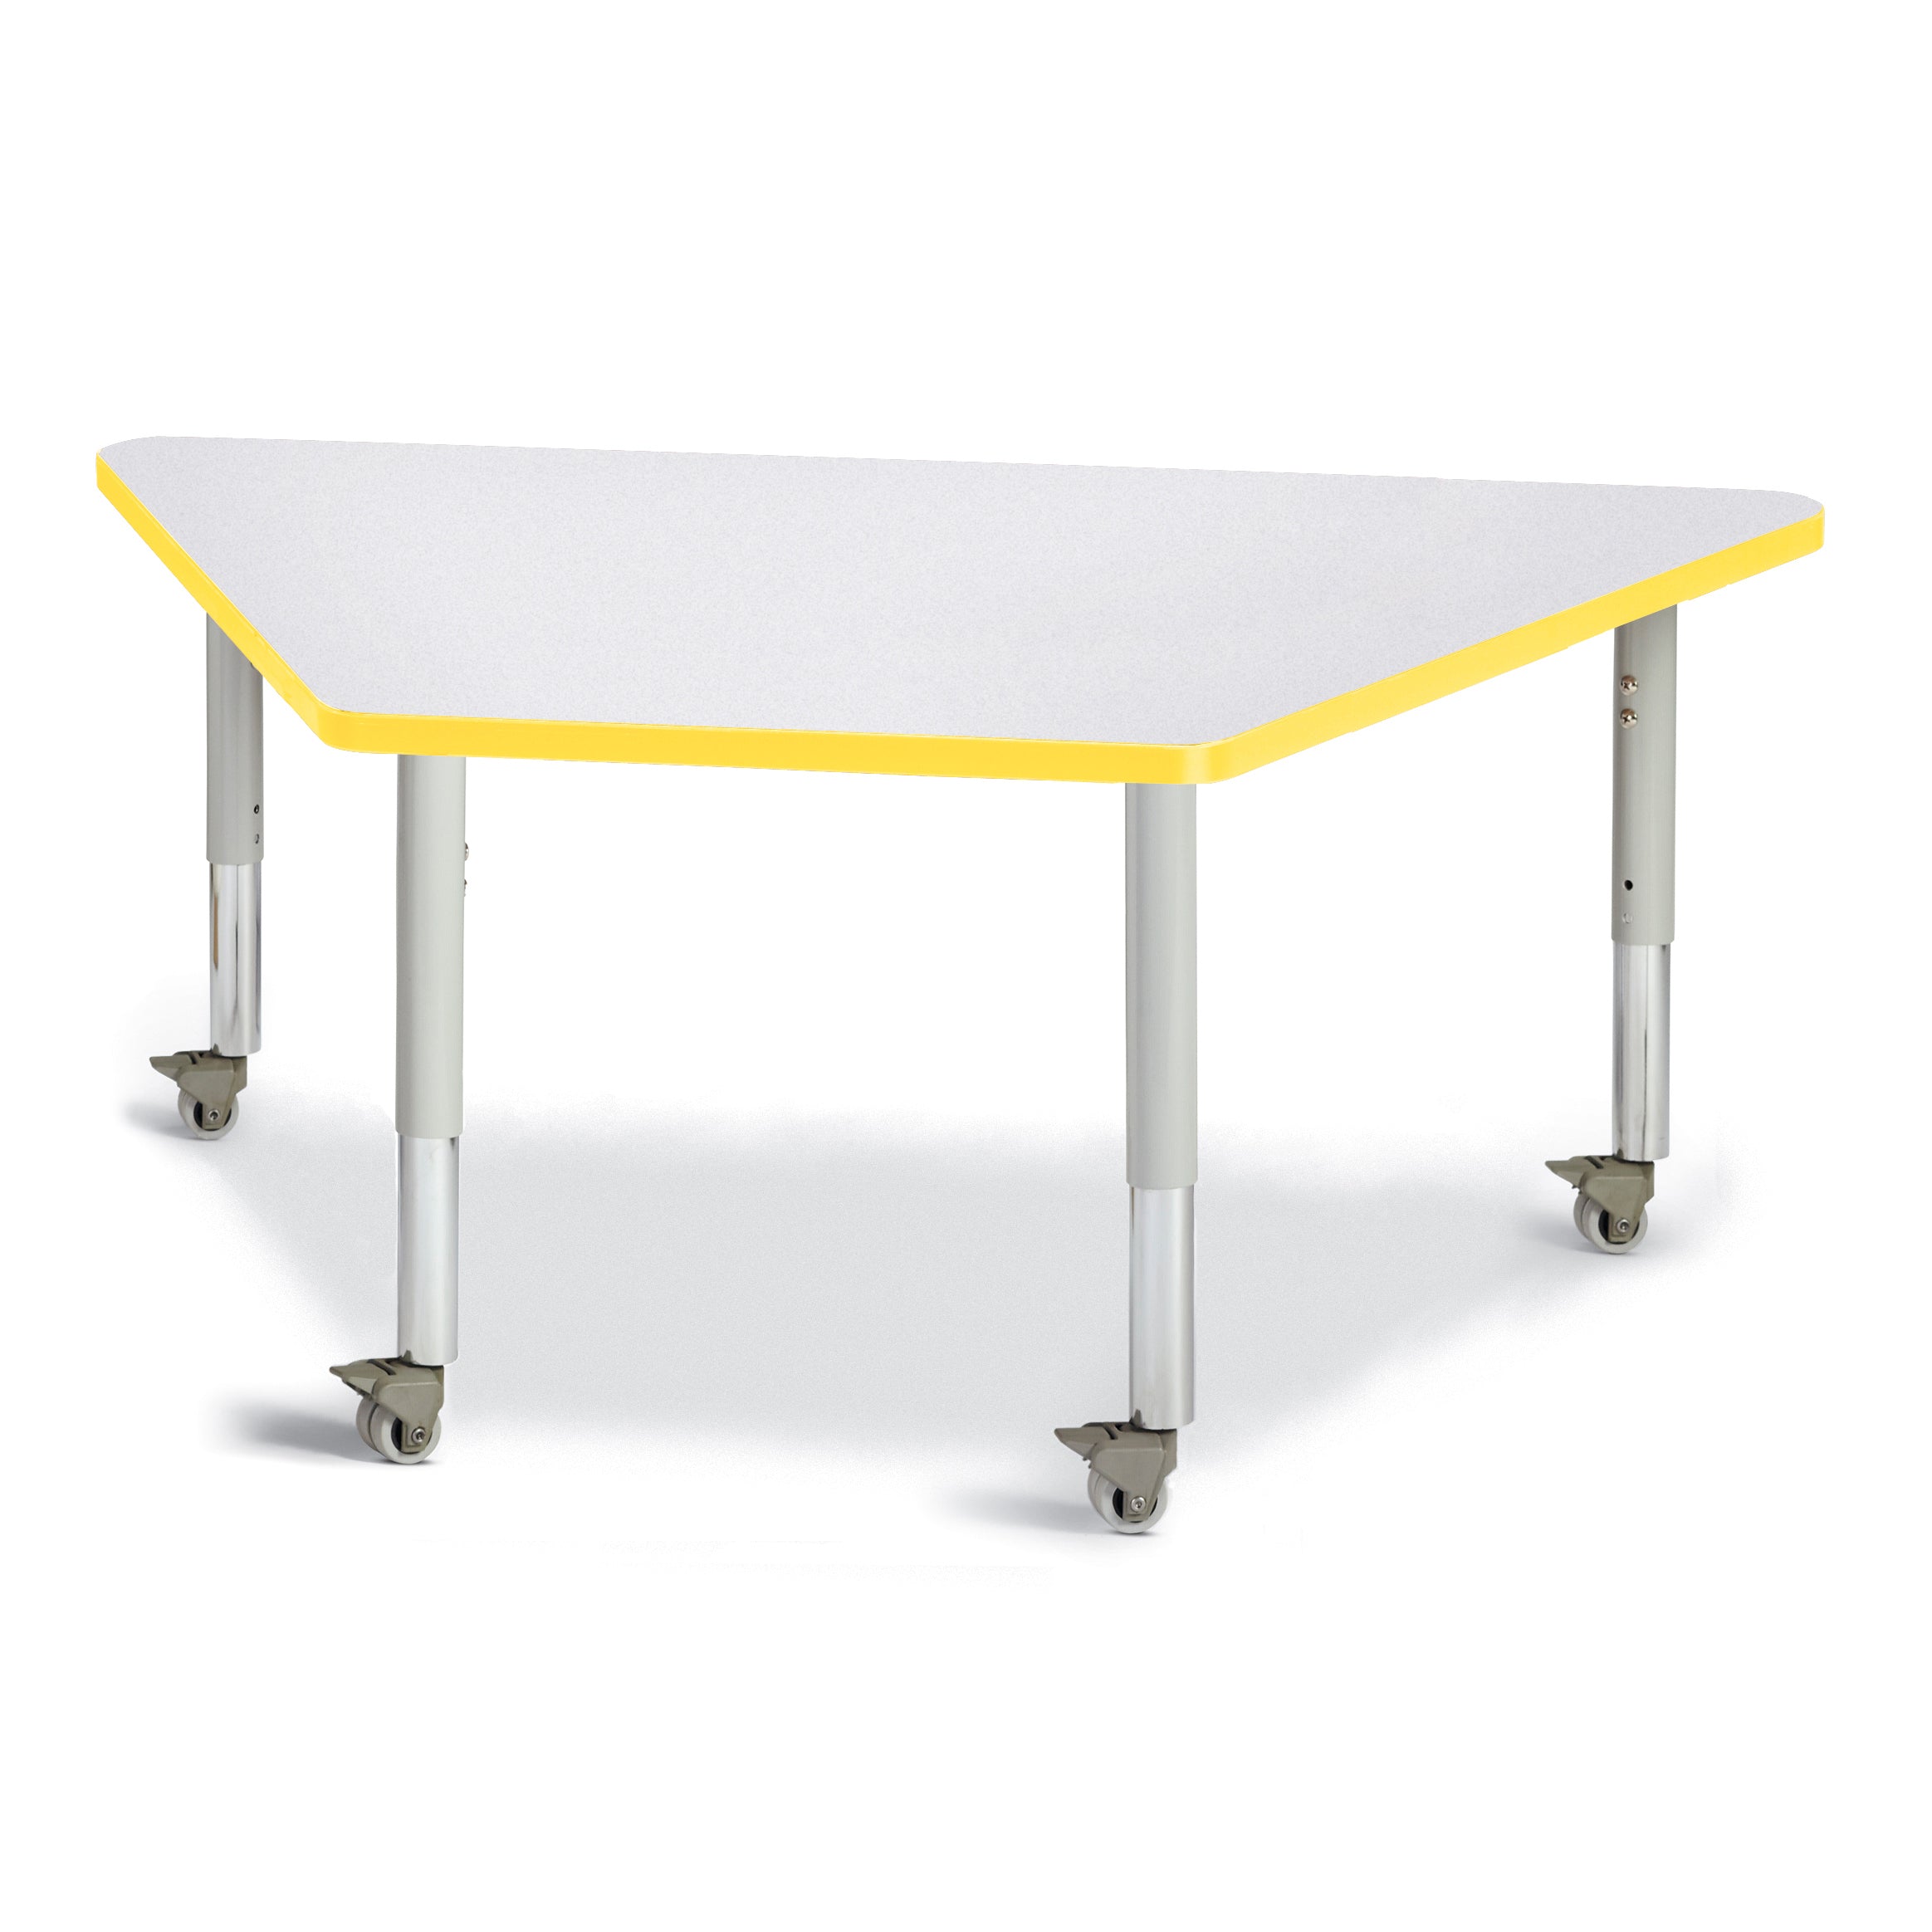 6443JCM007, Berries Trapezoid Activity Tables - 30" X 60", Mobile - Freckled Gray/Yellow/Gray